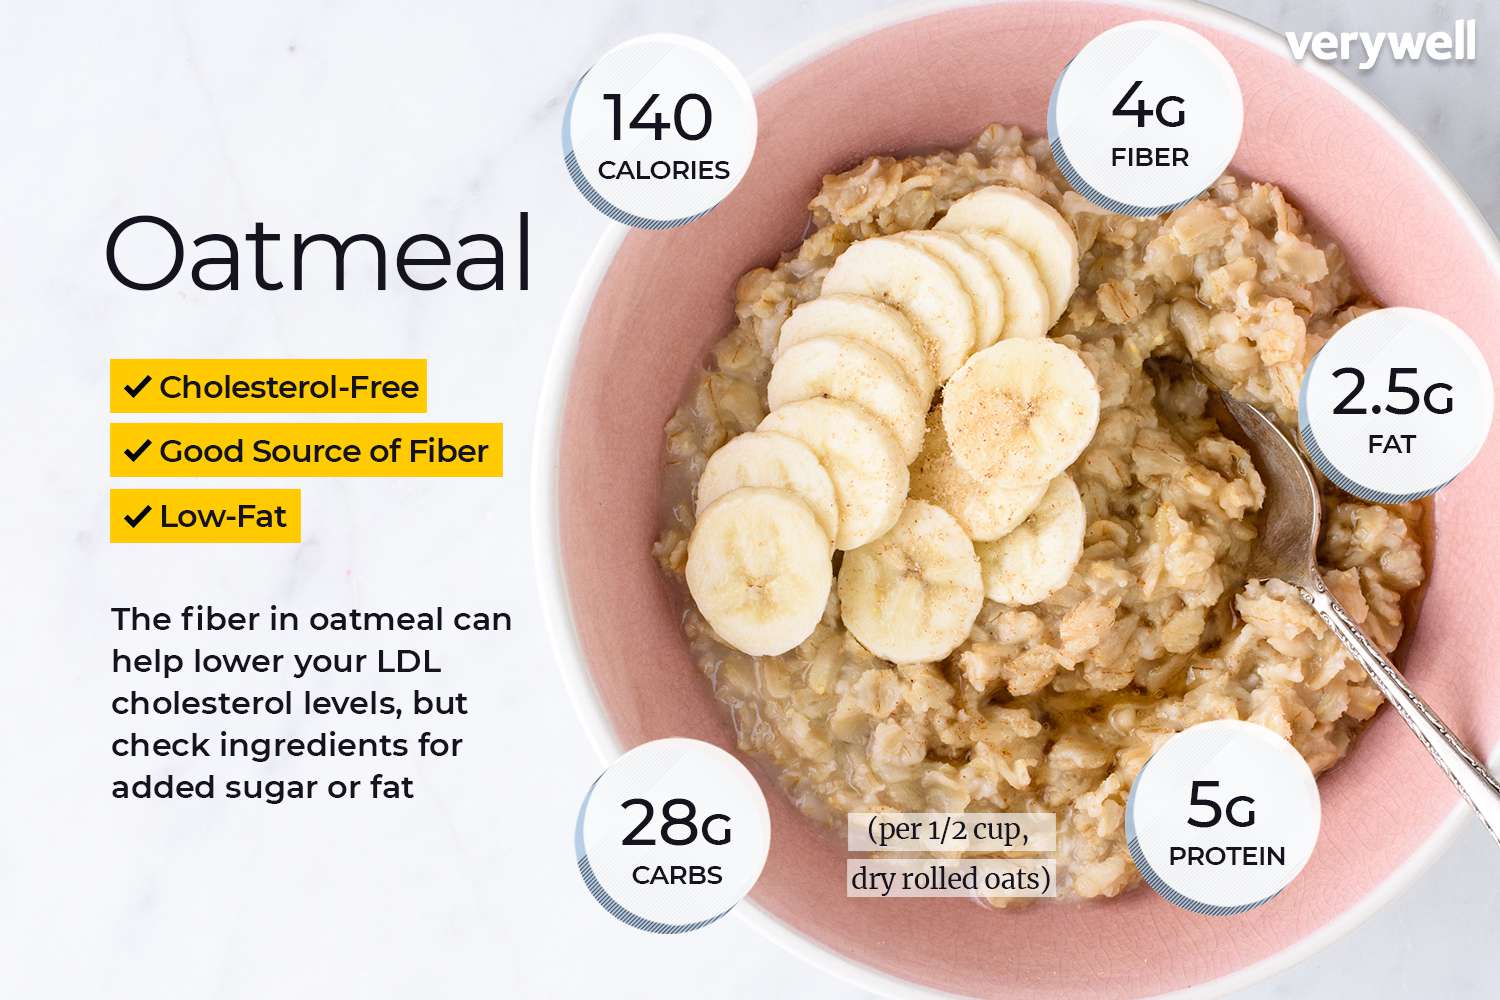 Wellness Lifestyle: The Health Benefits of Oatmeal and Sharing Various Recipes